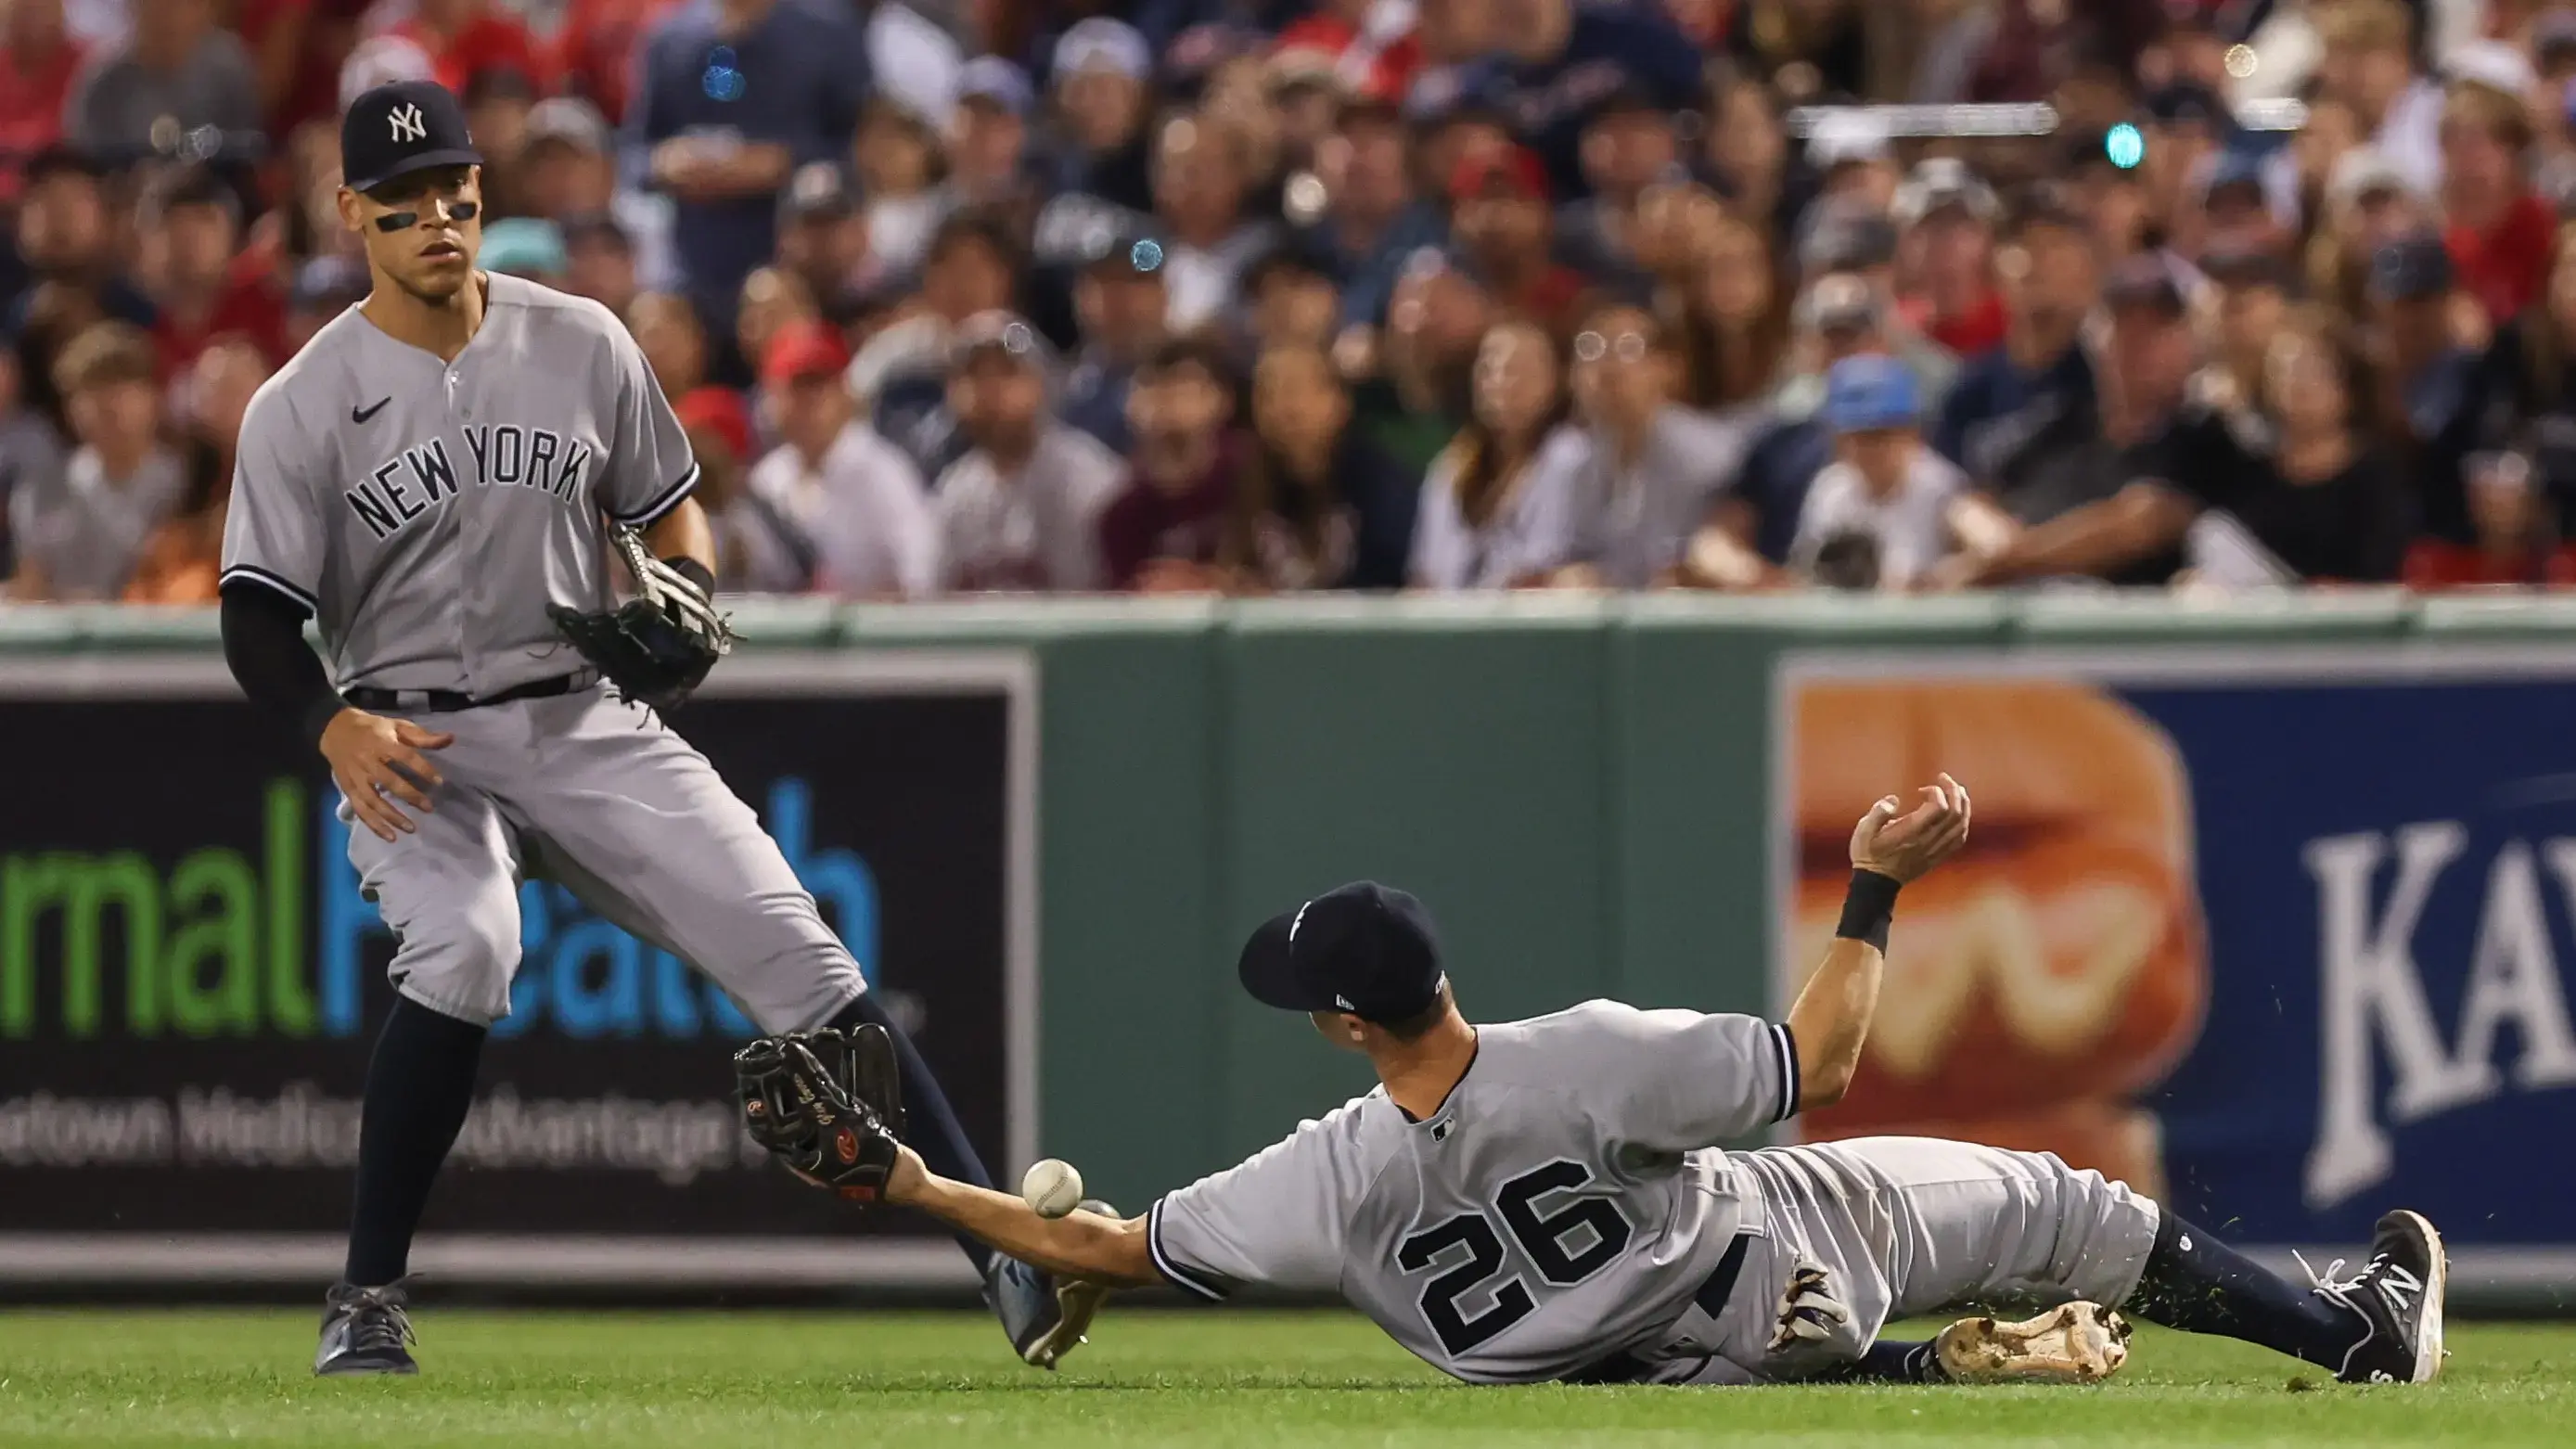 Jul 10, 2022; Boston, Massachusetts, USA; New York Yankees second baseman DJ LeMahieu (26) drops a fly ball during the sixth inning against the Boston Red Sox at Fenway Park. Mandatory Credit: Paul Rutherford-USA TODAY Sports / Paul Rutherford-USA TODAY Sports